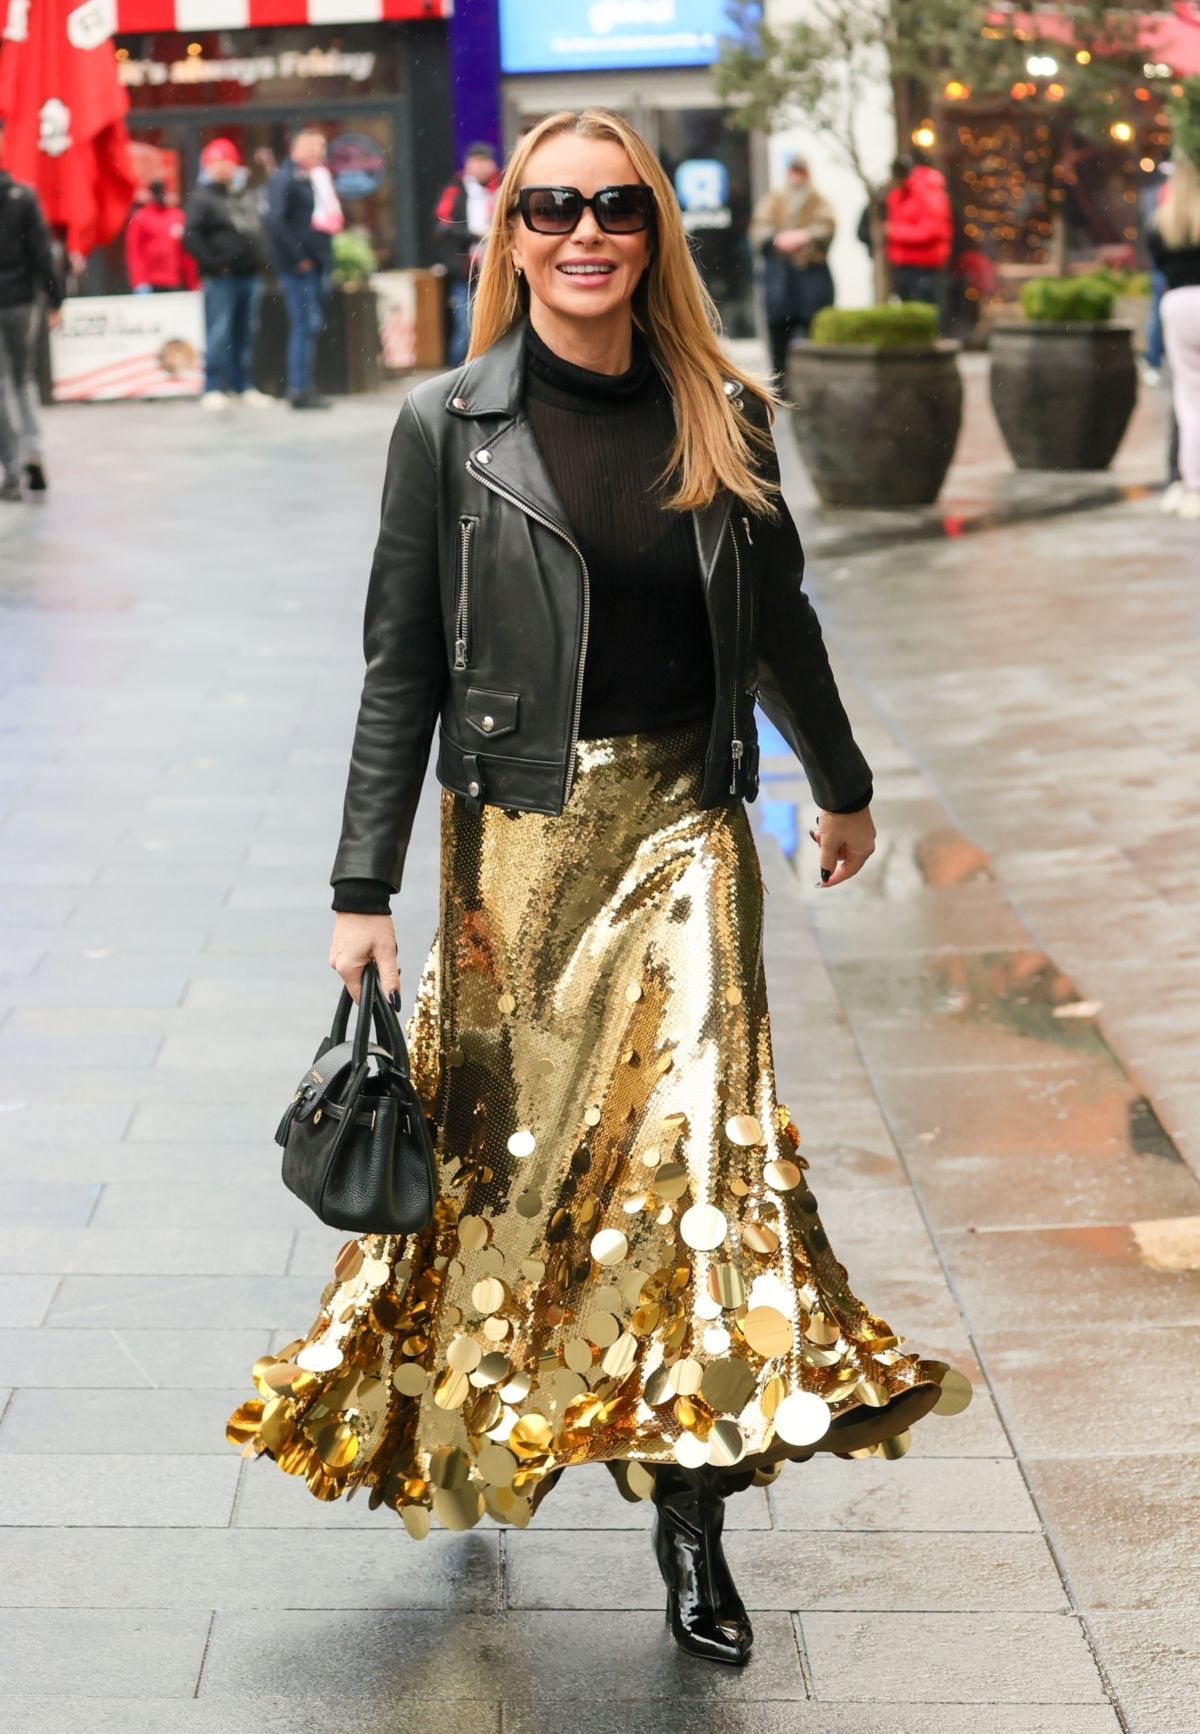 Amanda Holden stuns in chic black and golden outfit at Heart Radio London 5